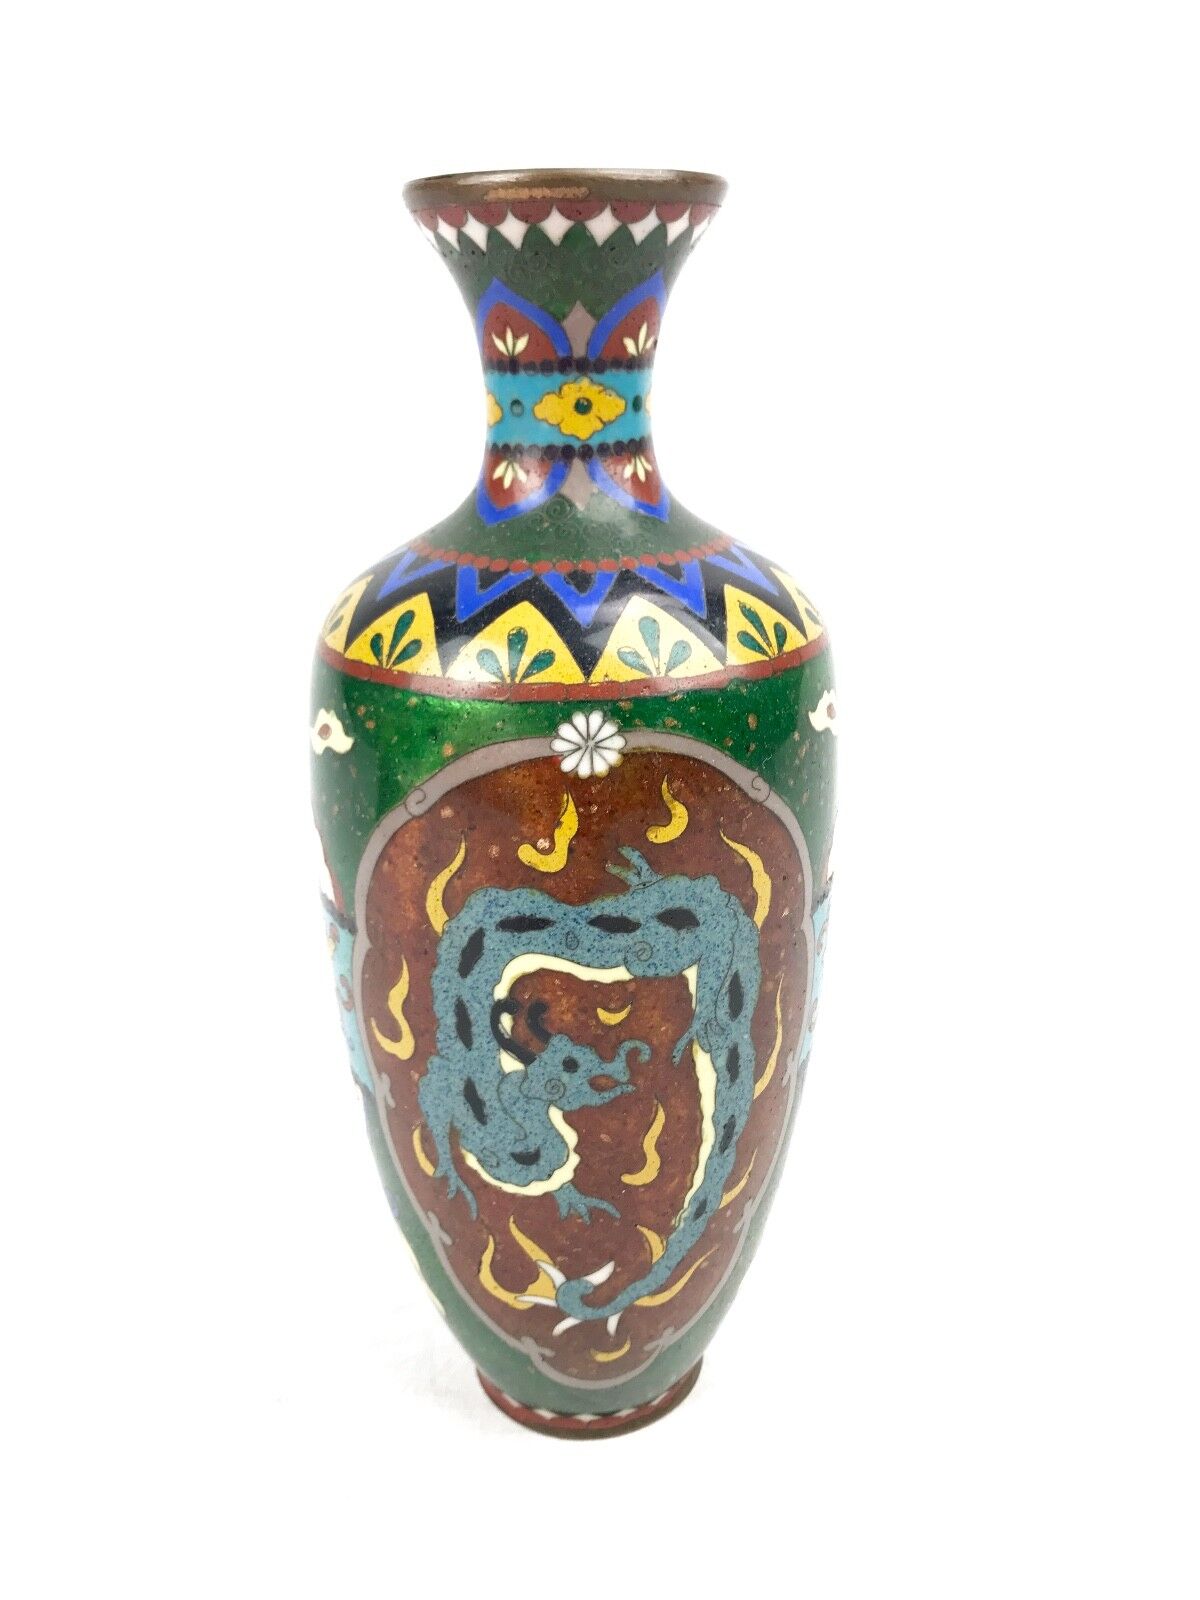 Antique Cloisonne Chinese Vase - Dragon / Early 20th Century / Oriental / Green